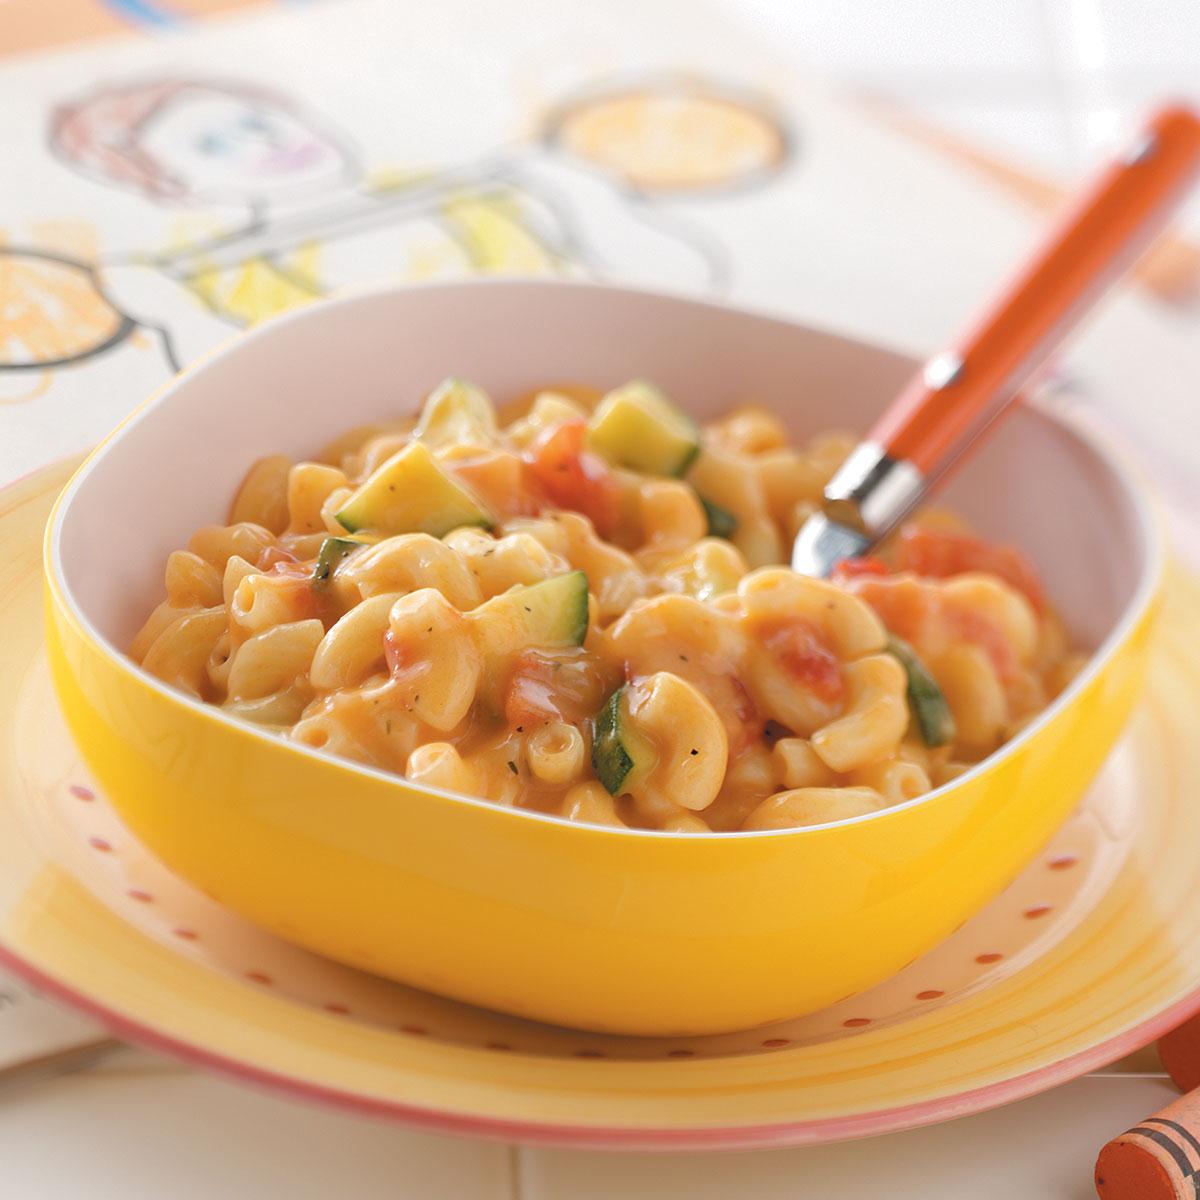 facts about macaroni and cheese for kids